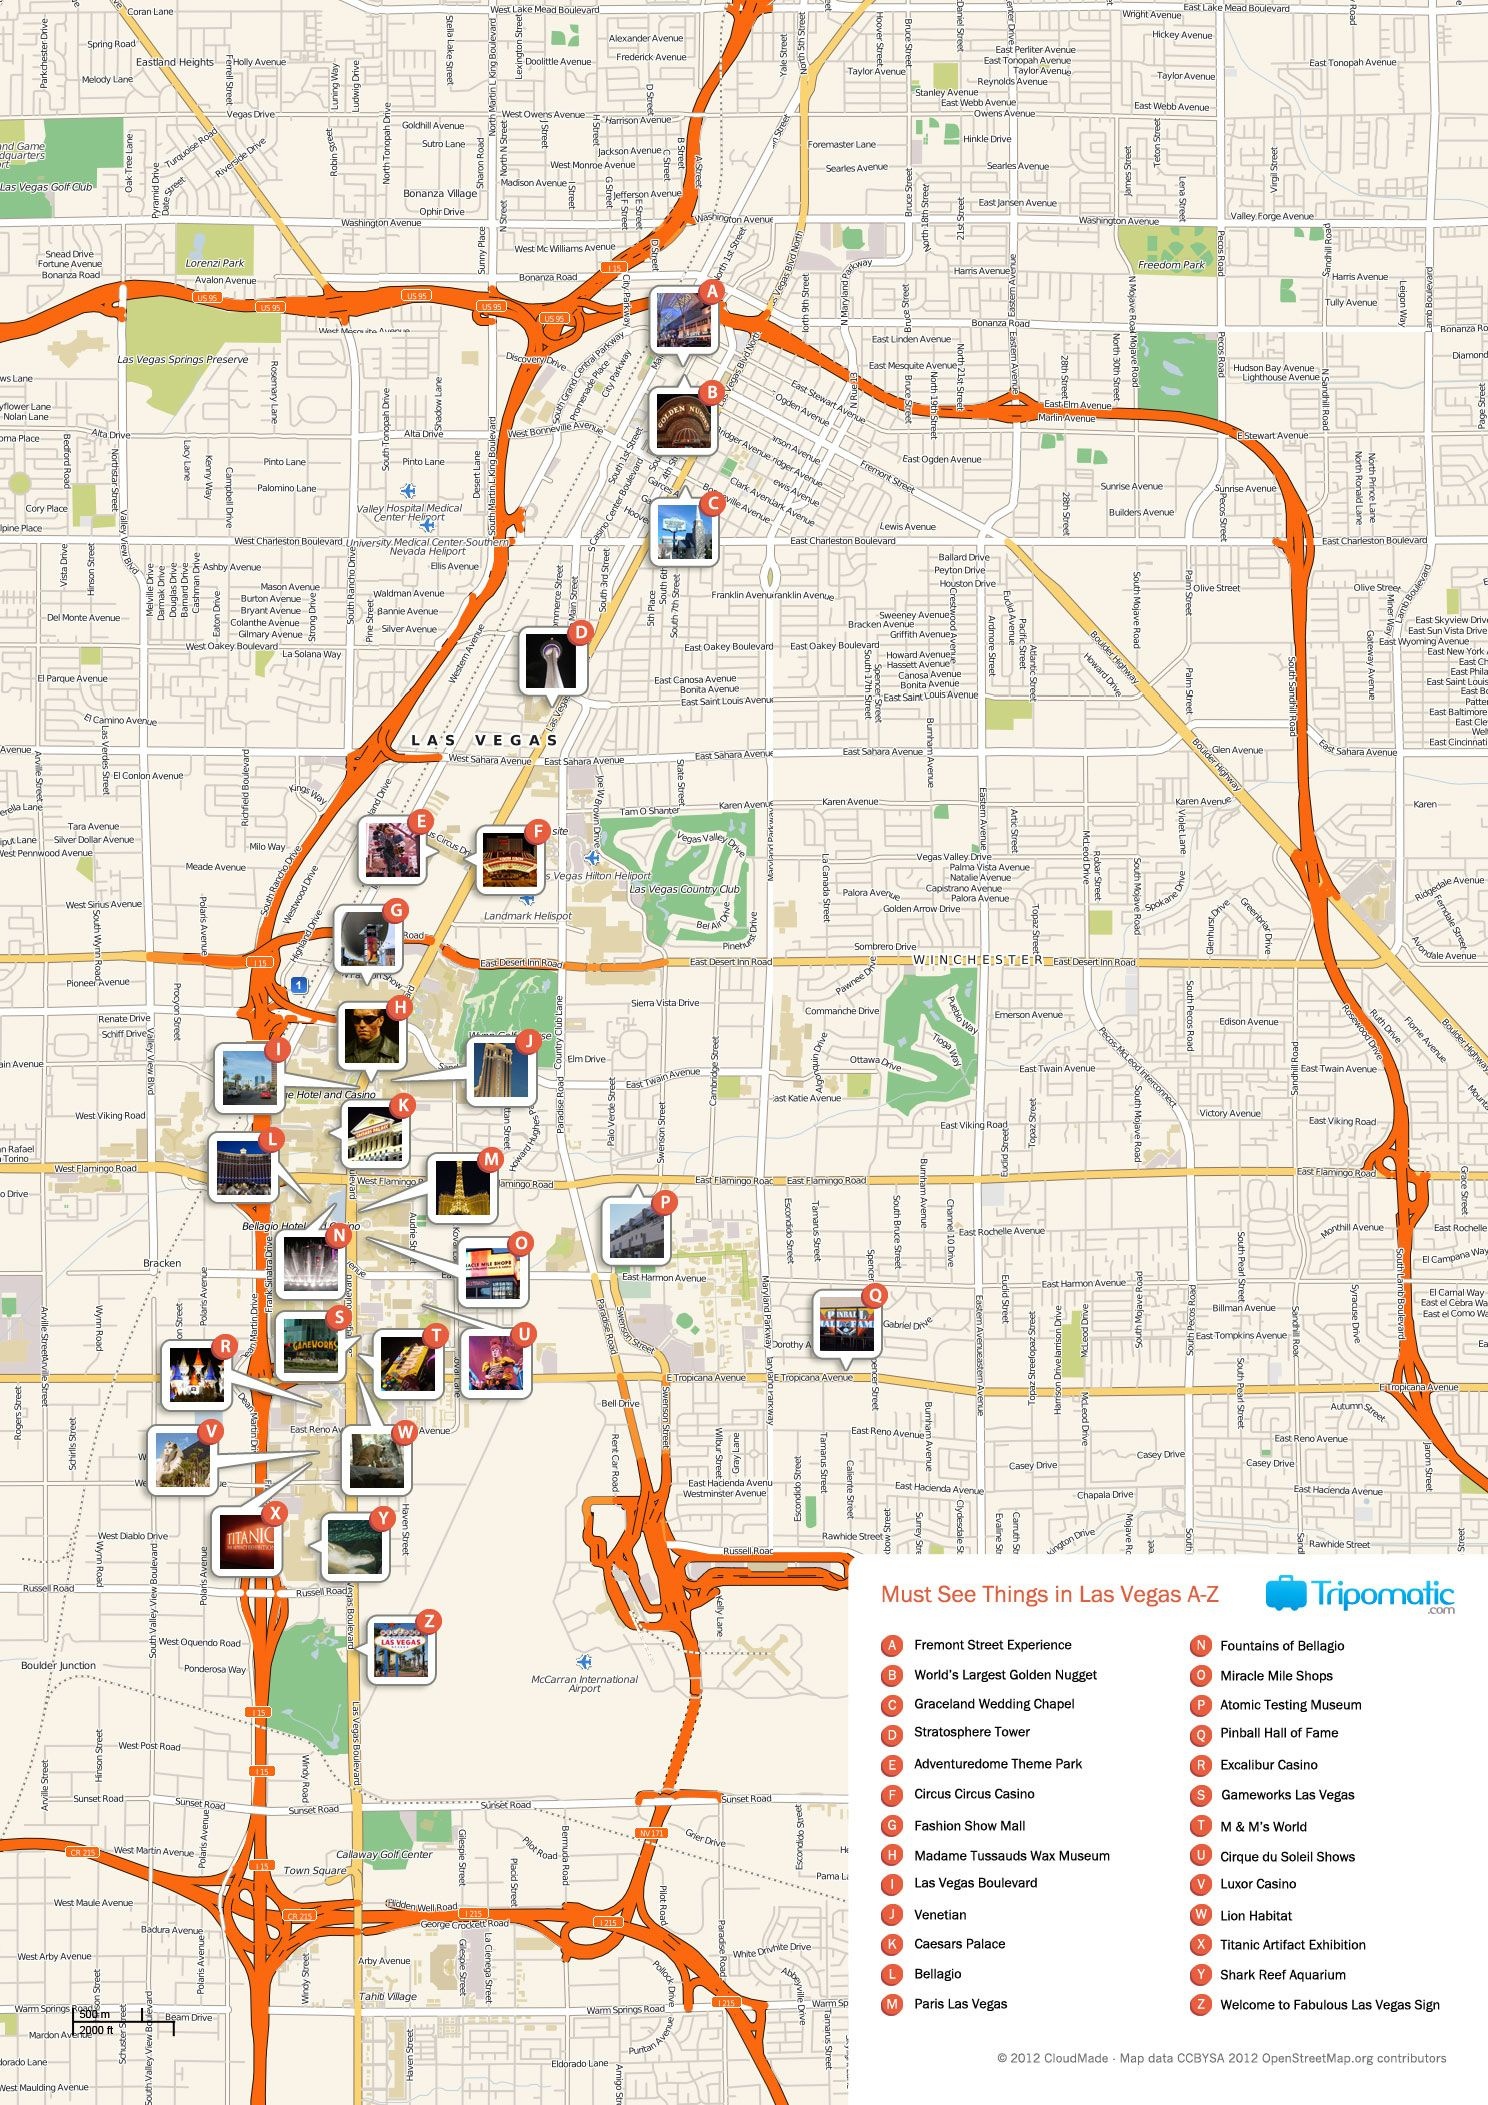 Free Printable Map Of Las Vegas Attractions. | Free Tourist Maps - Free Printable Las Vegas Coupons 2014